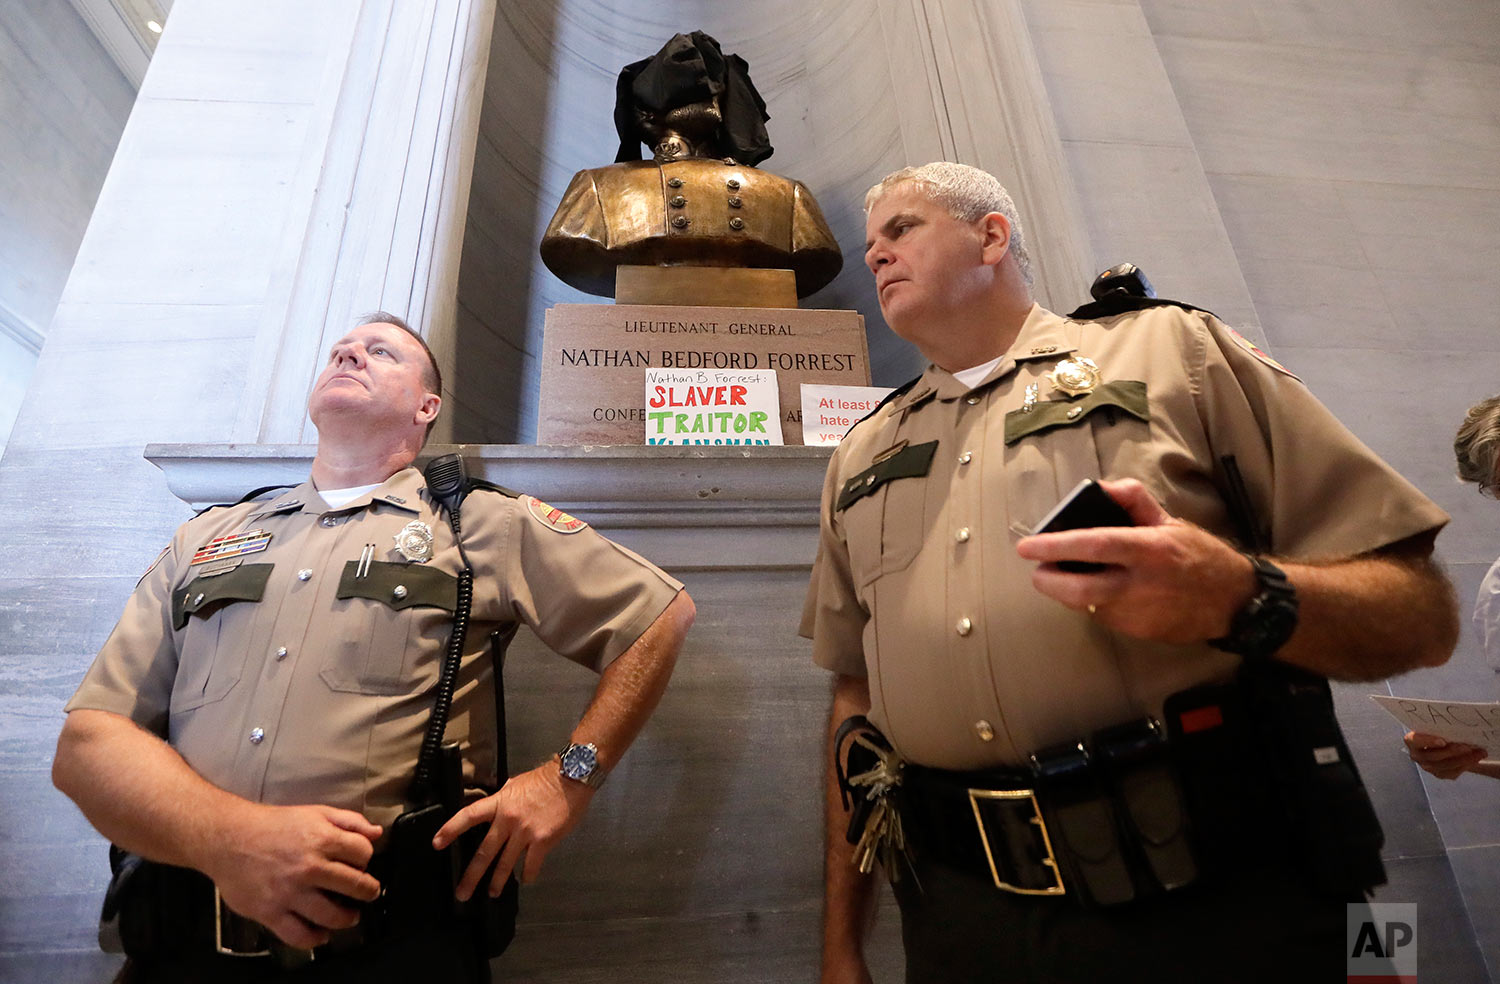  Tennessee State Troopers stand near a bust of Nathan Bedford Forrest after protesters covered it and placed signs in front of it Monday, Aug. 14, 2017, in Nashville, Tenn. Protesters called for the removal of the bust, which is displayed in the hall